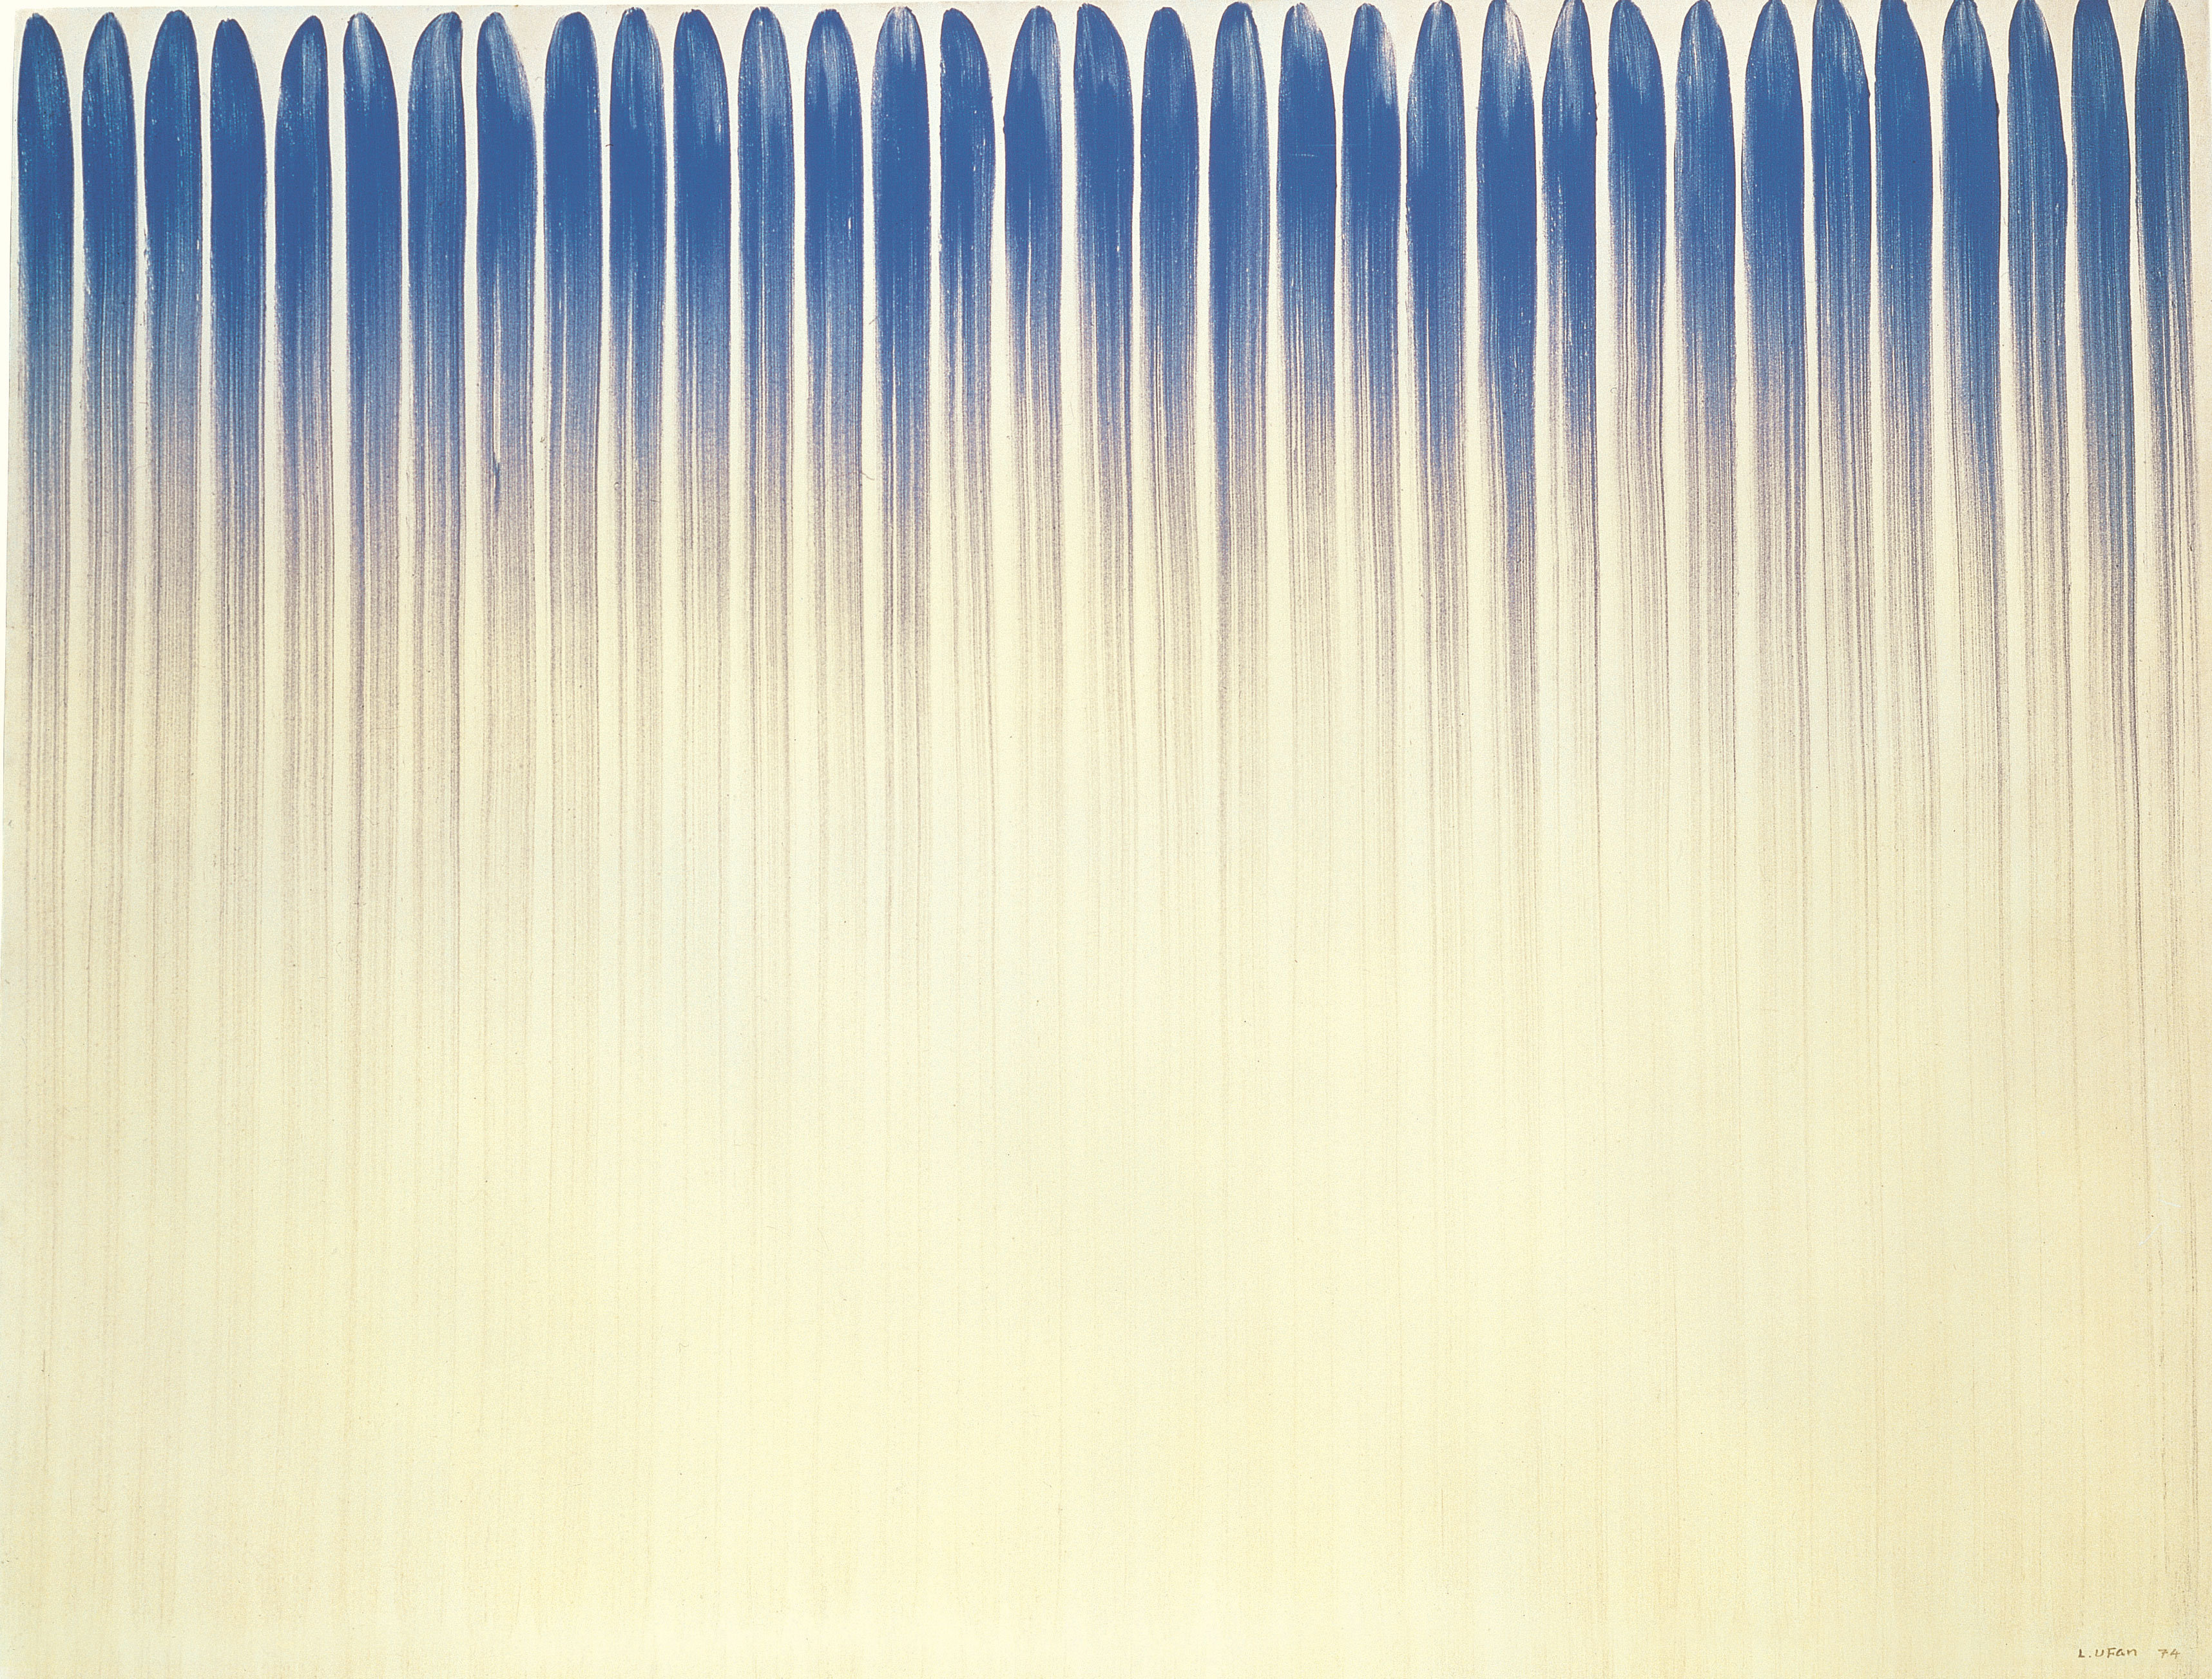 Lee Ufan, From Line, 1973, glue and mineral pigment on canvas